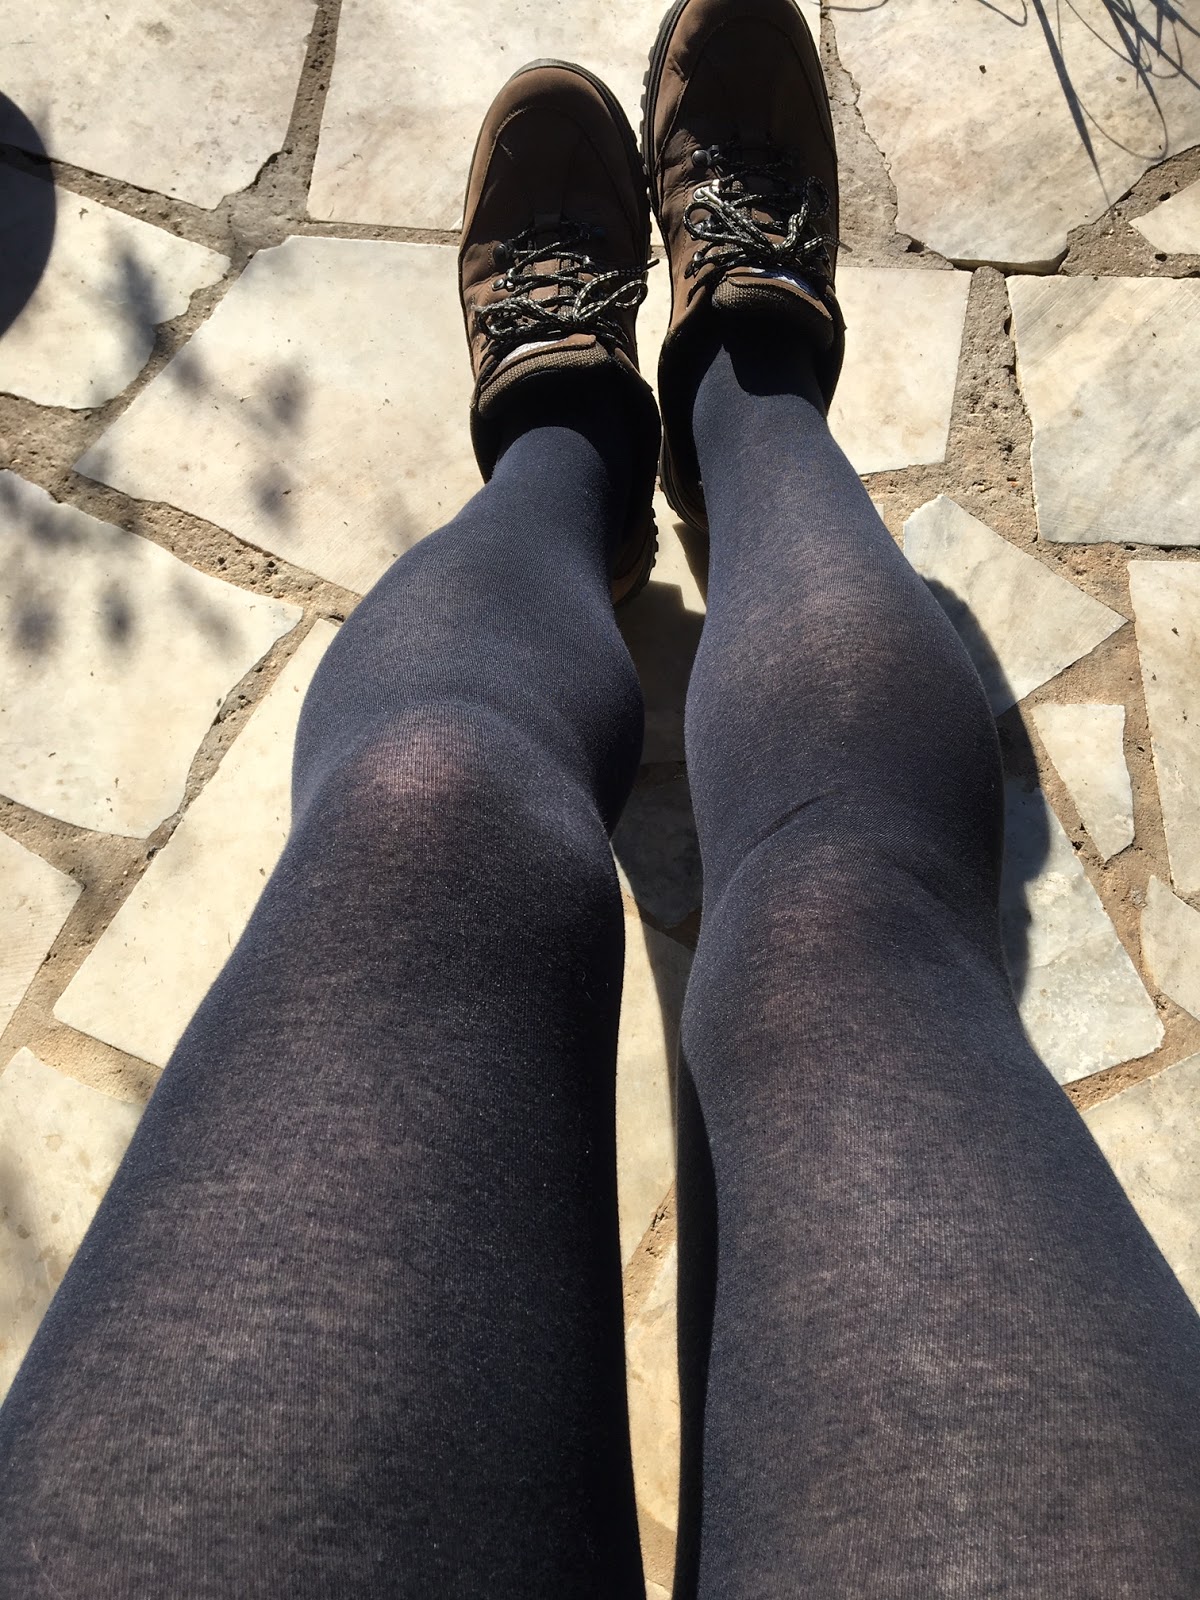 Falke Tights Review: This hosiery can just falke off